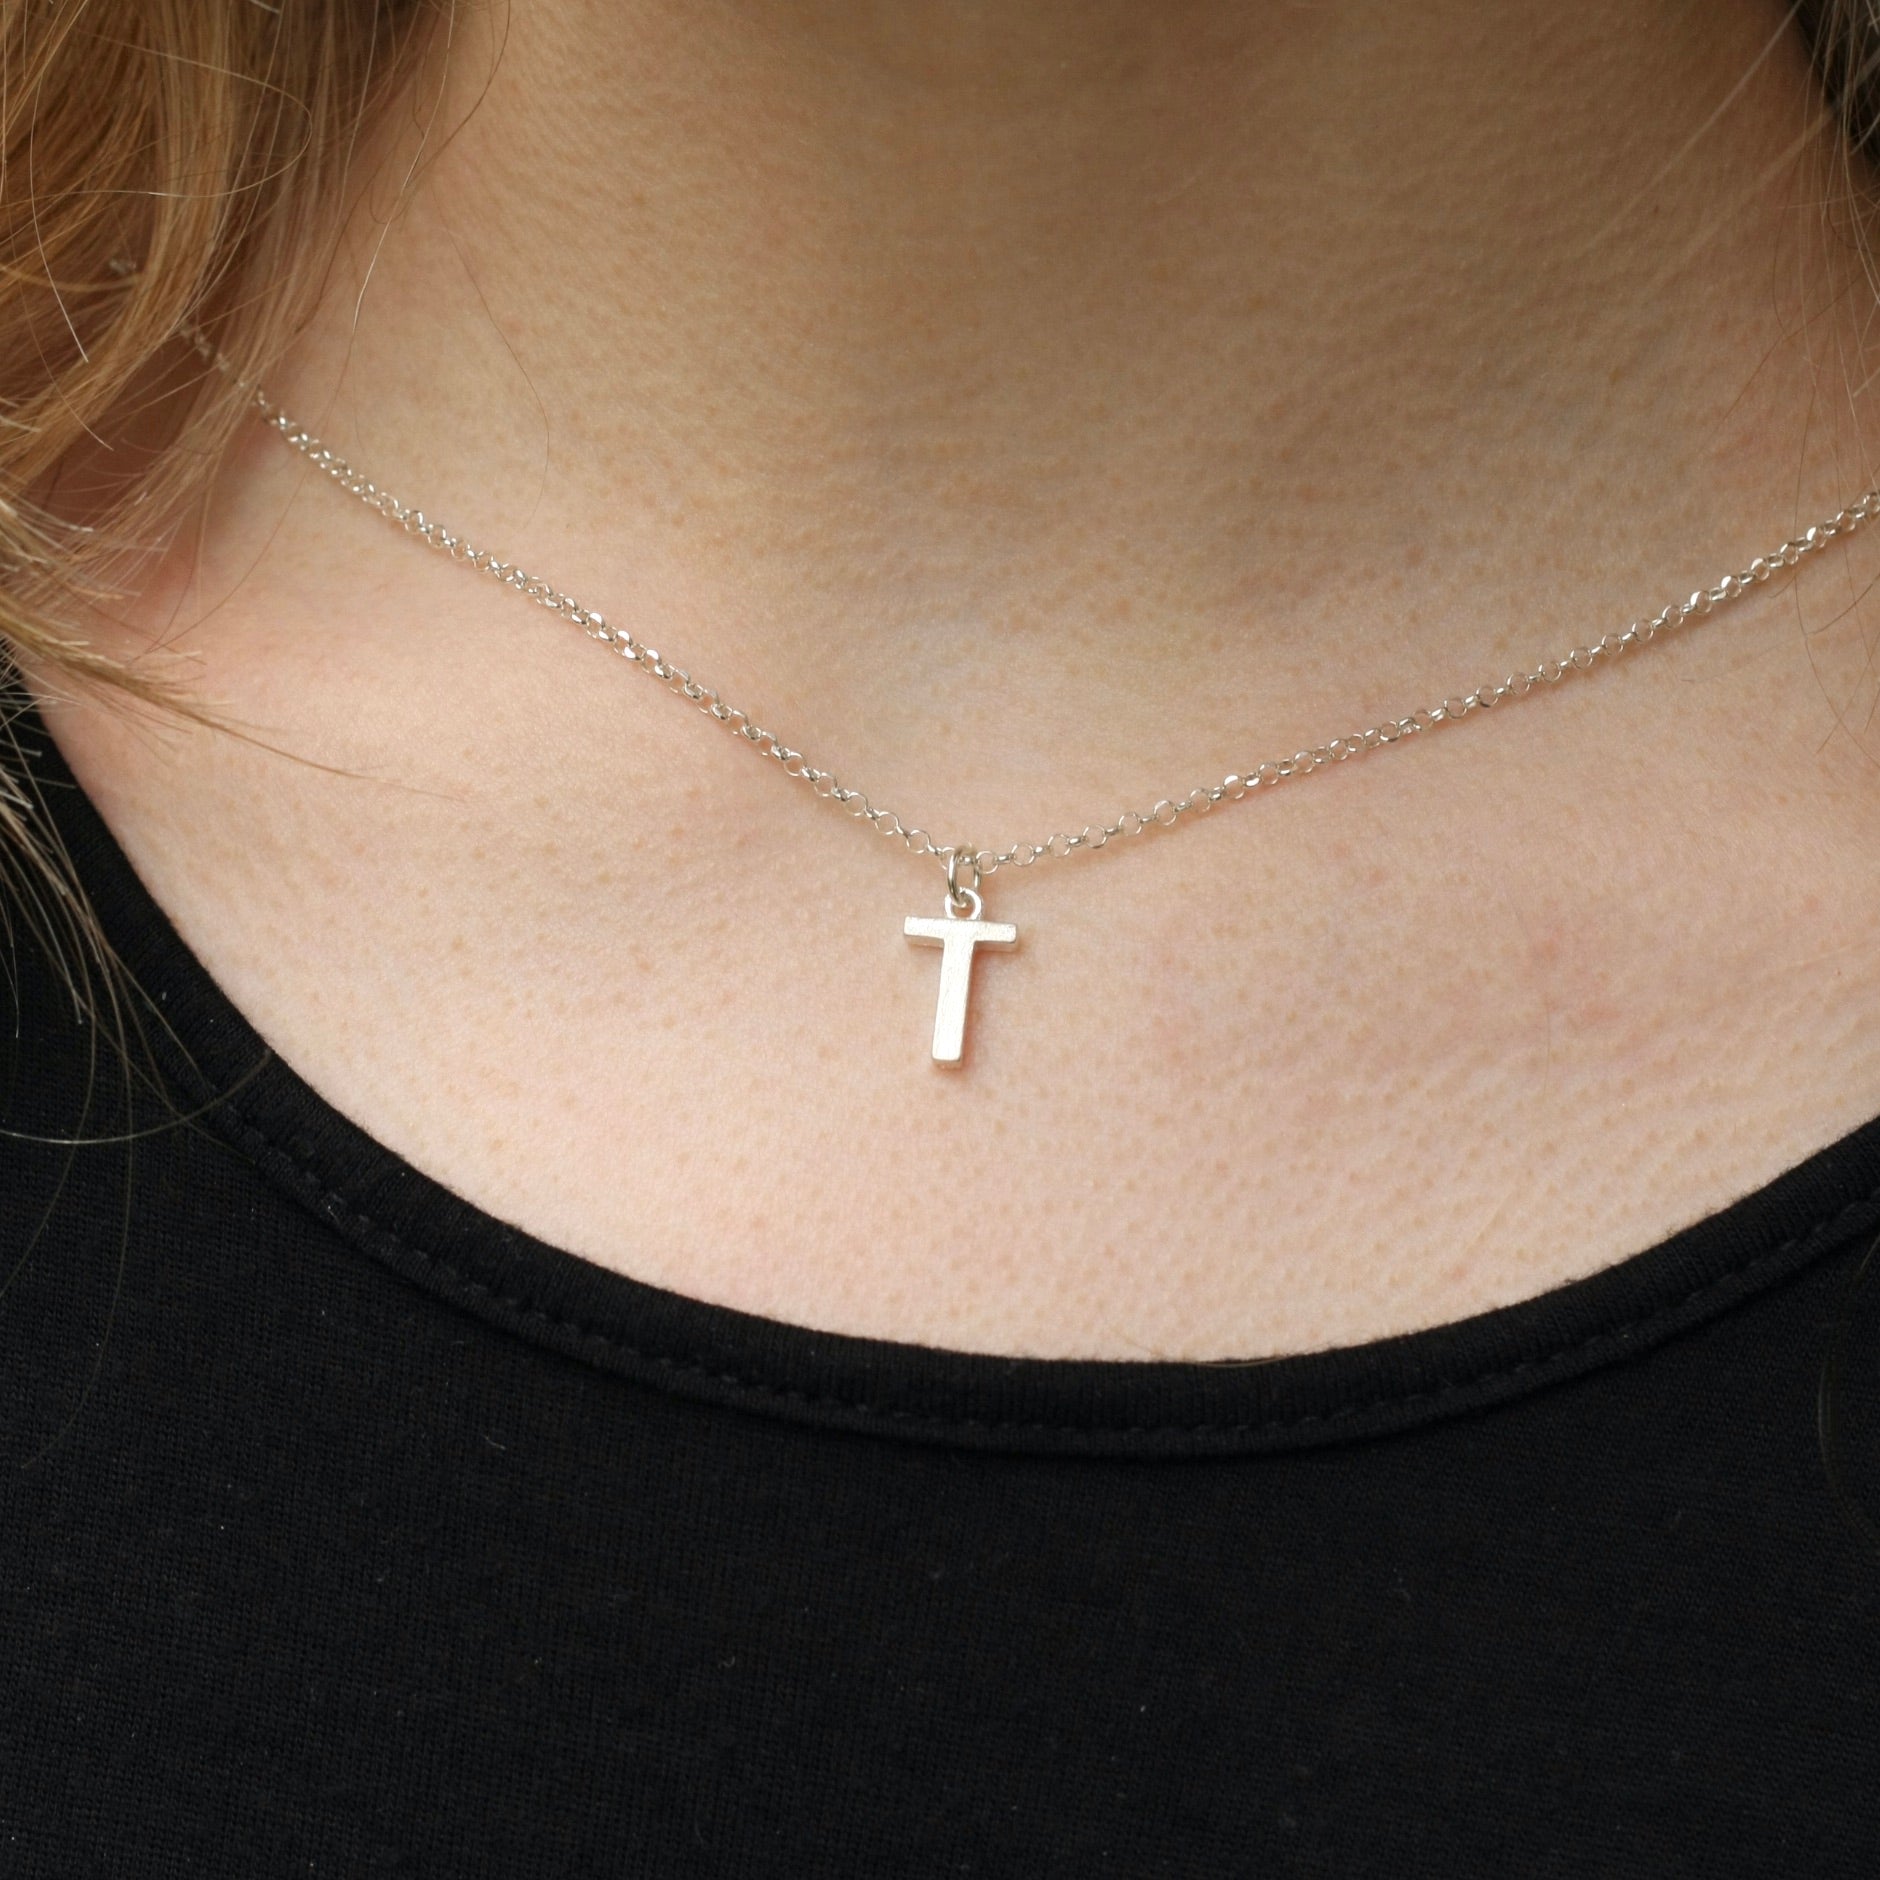 Personalized Sterling Silver Initial Necklace